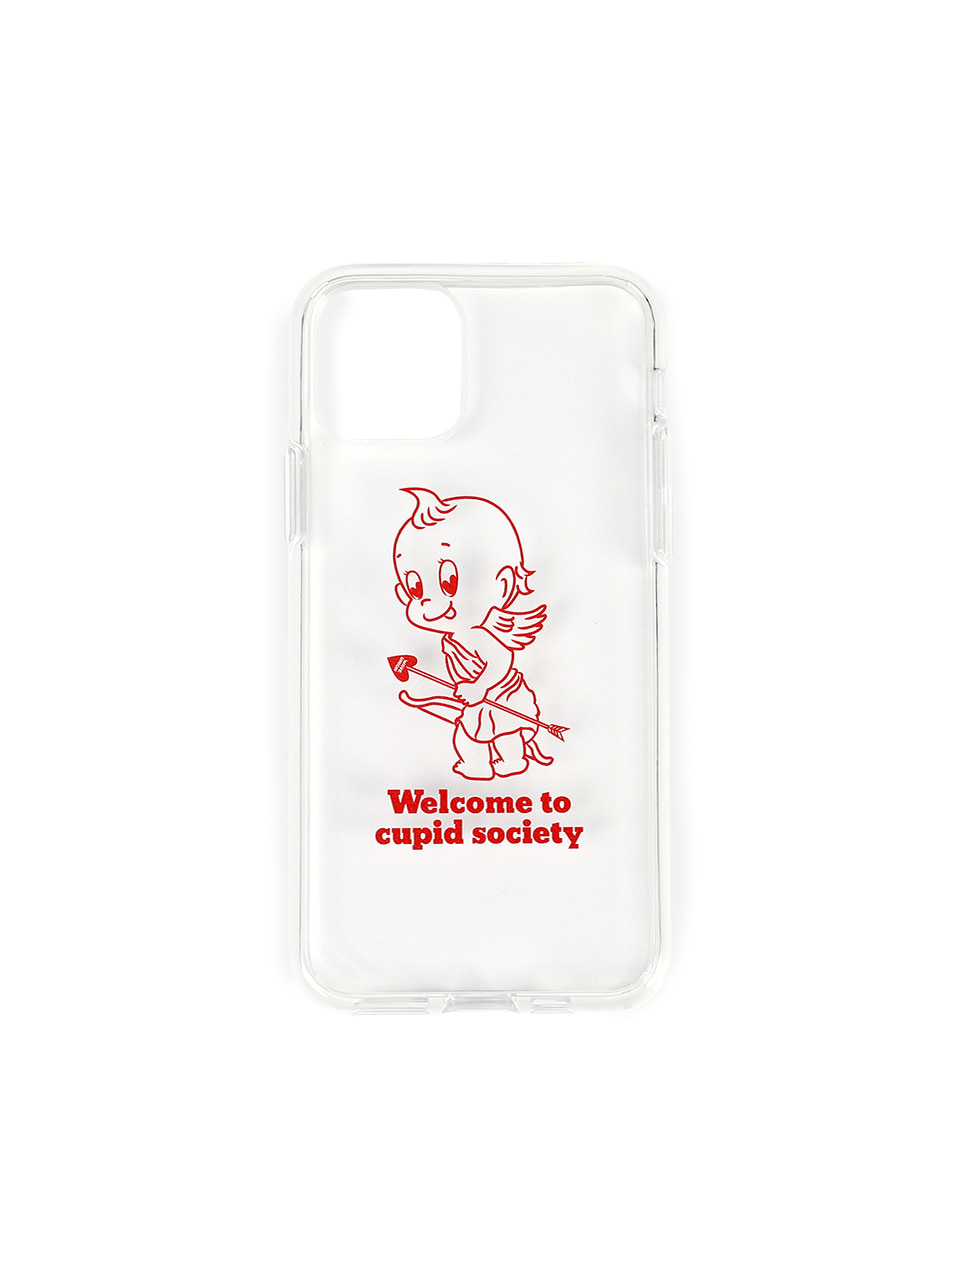 Cupid society iPhone 11 pro case clear jell hard